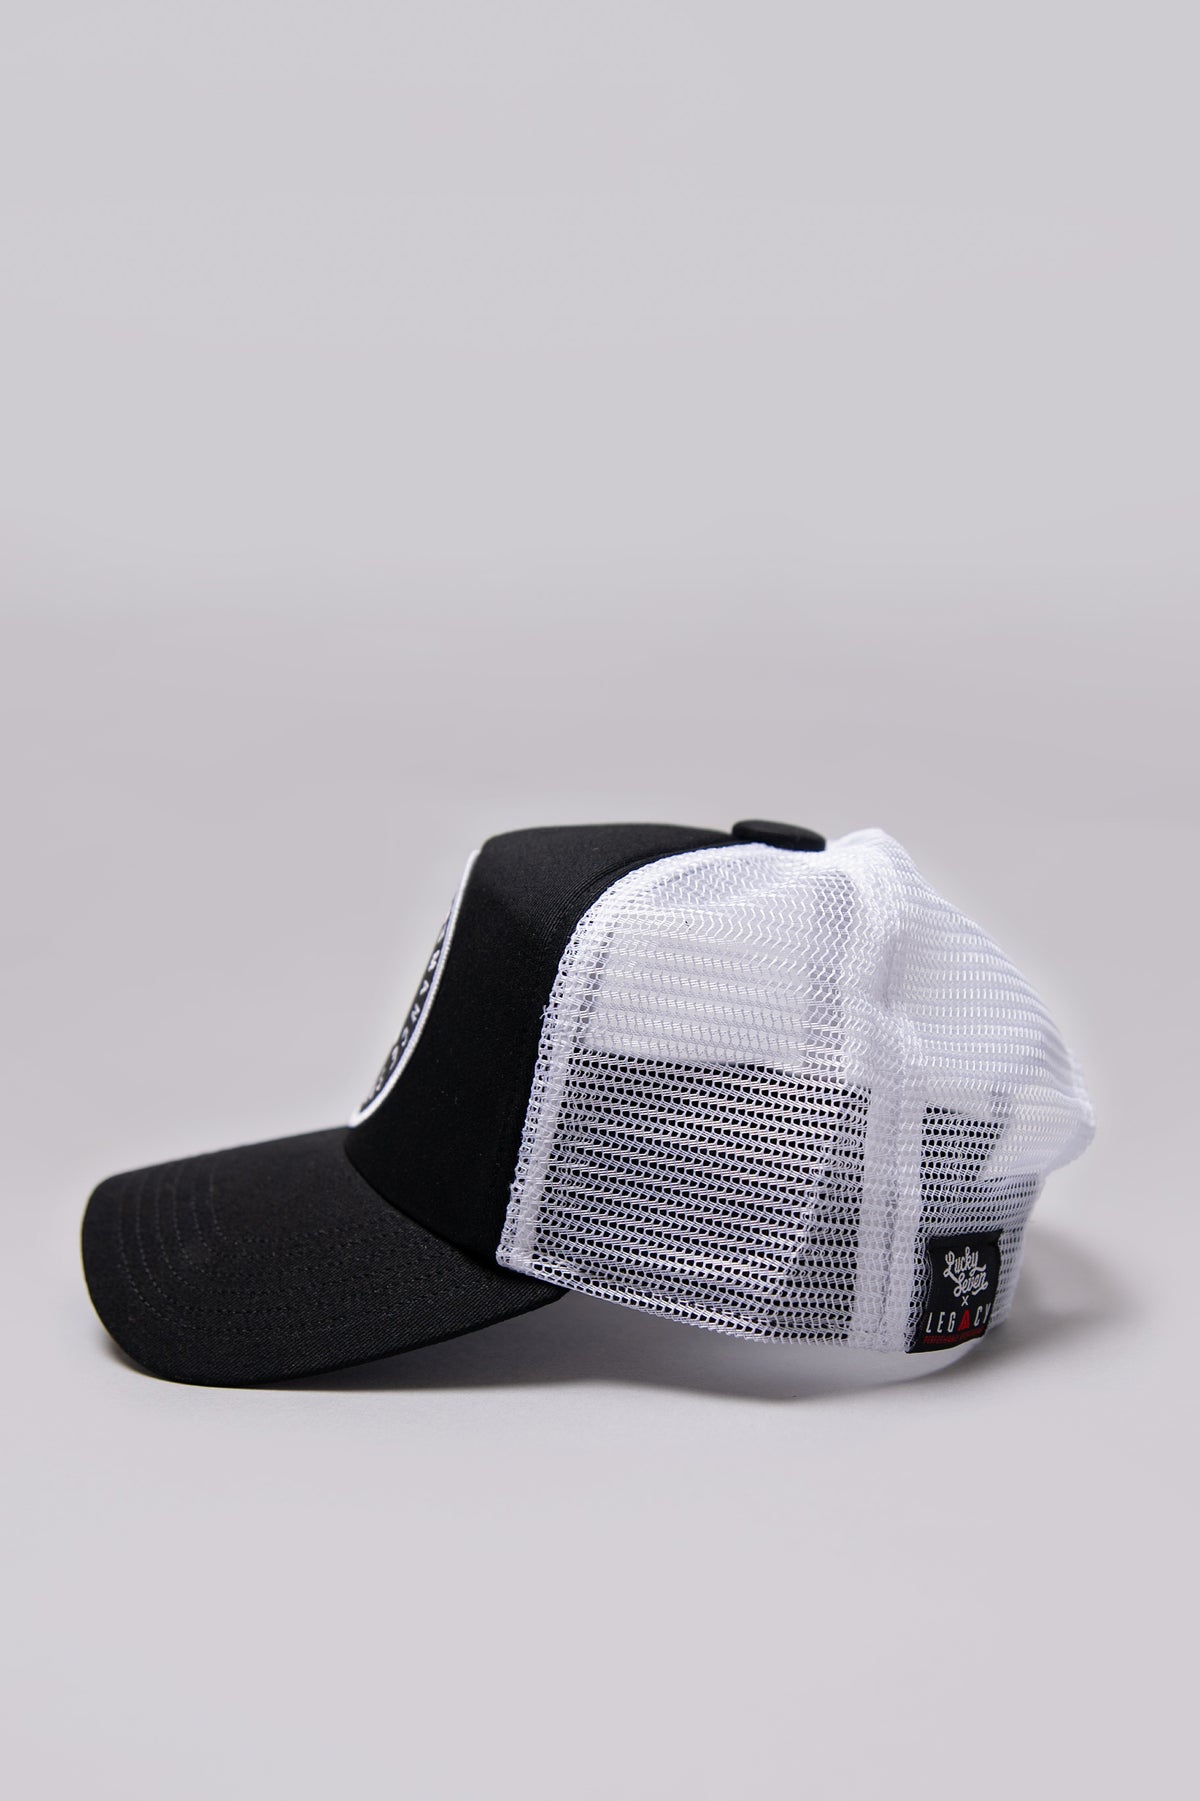 Legacy Trucker hat Black and White